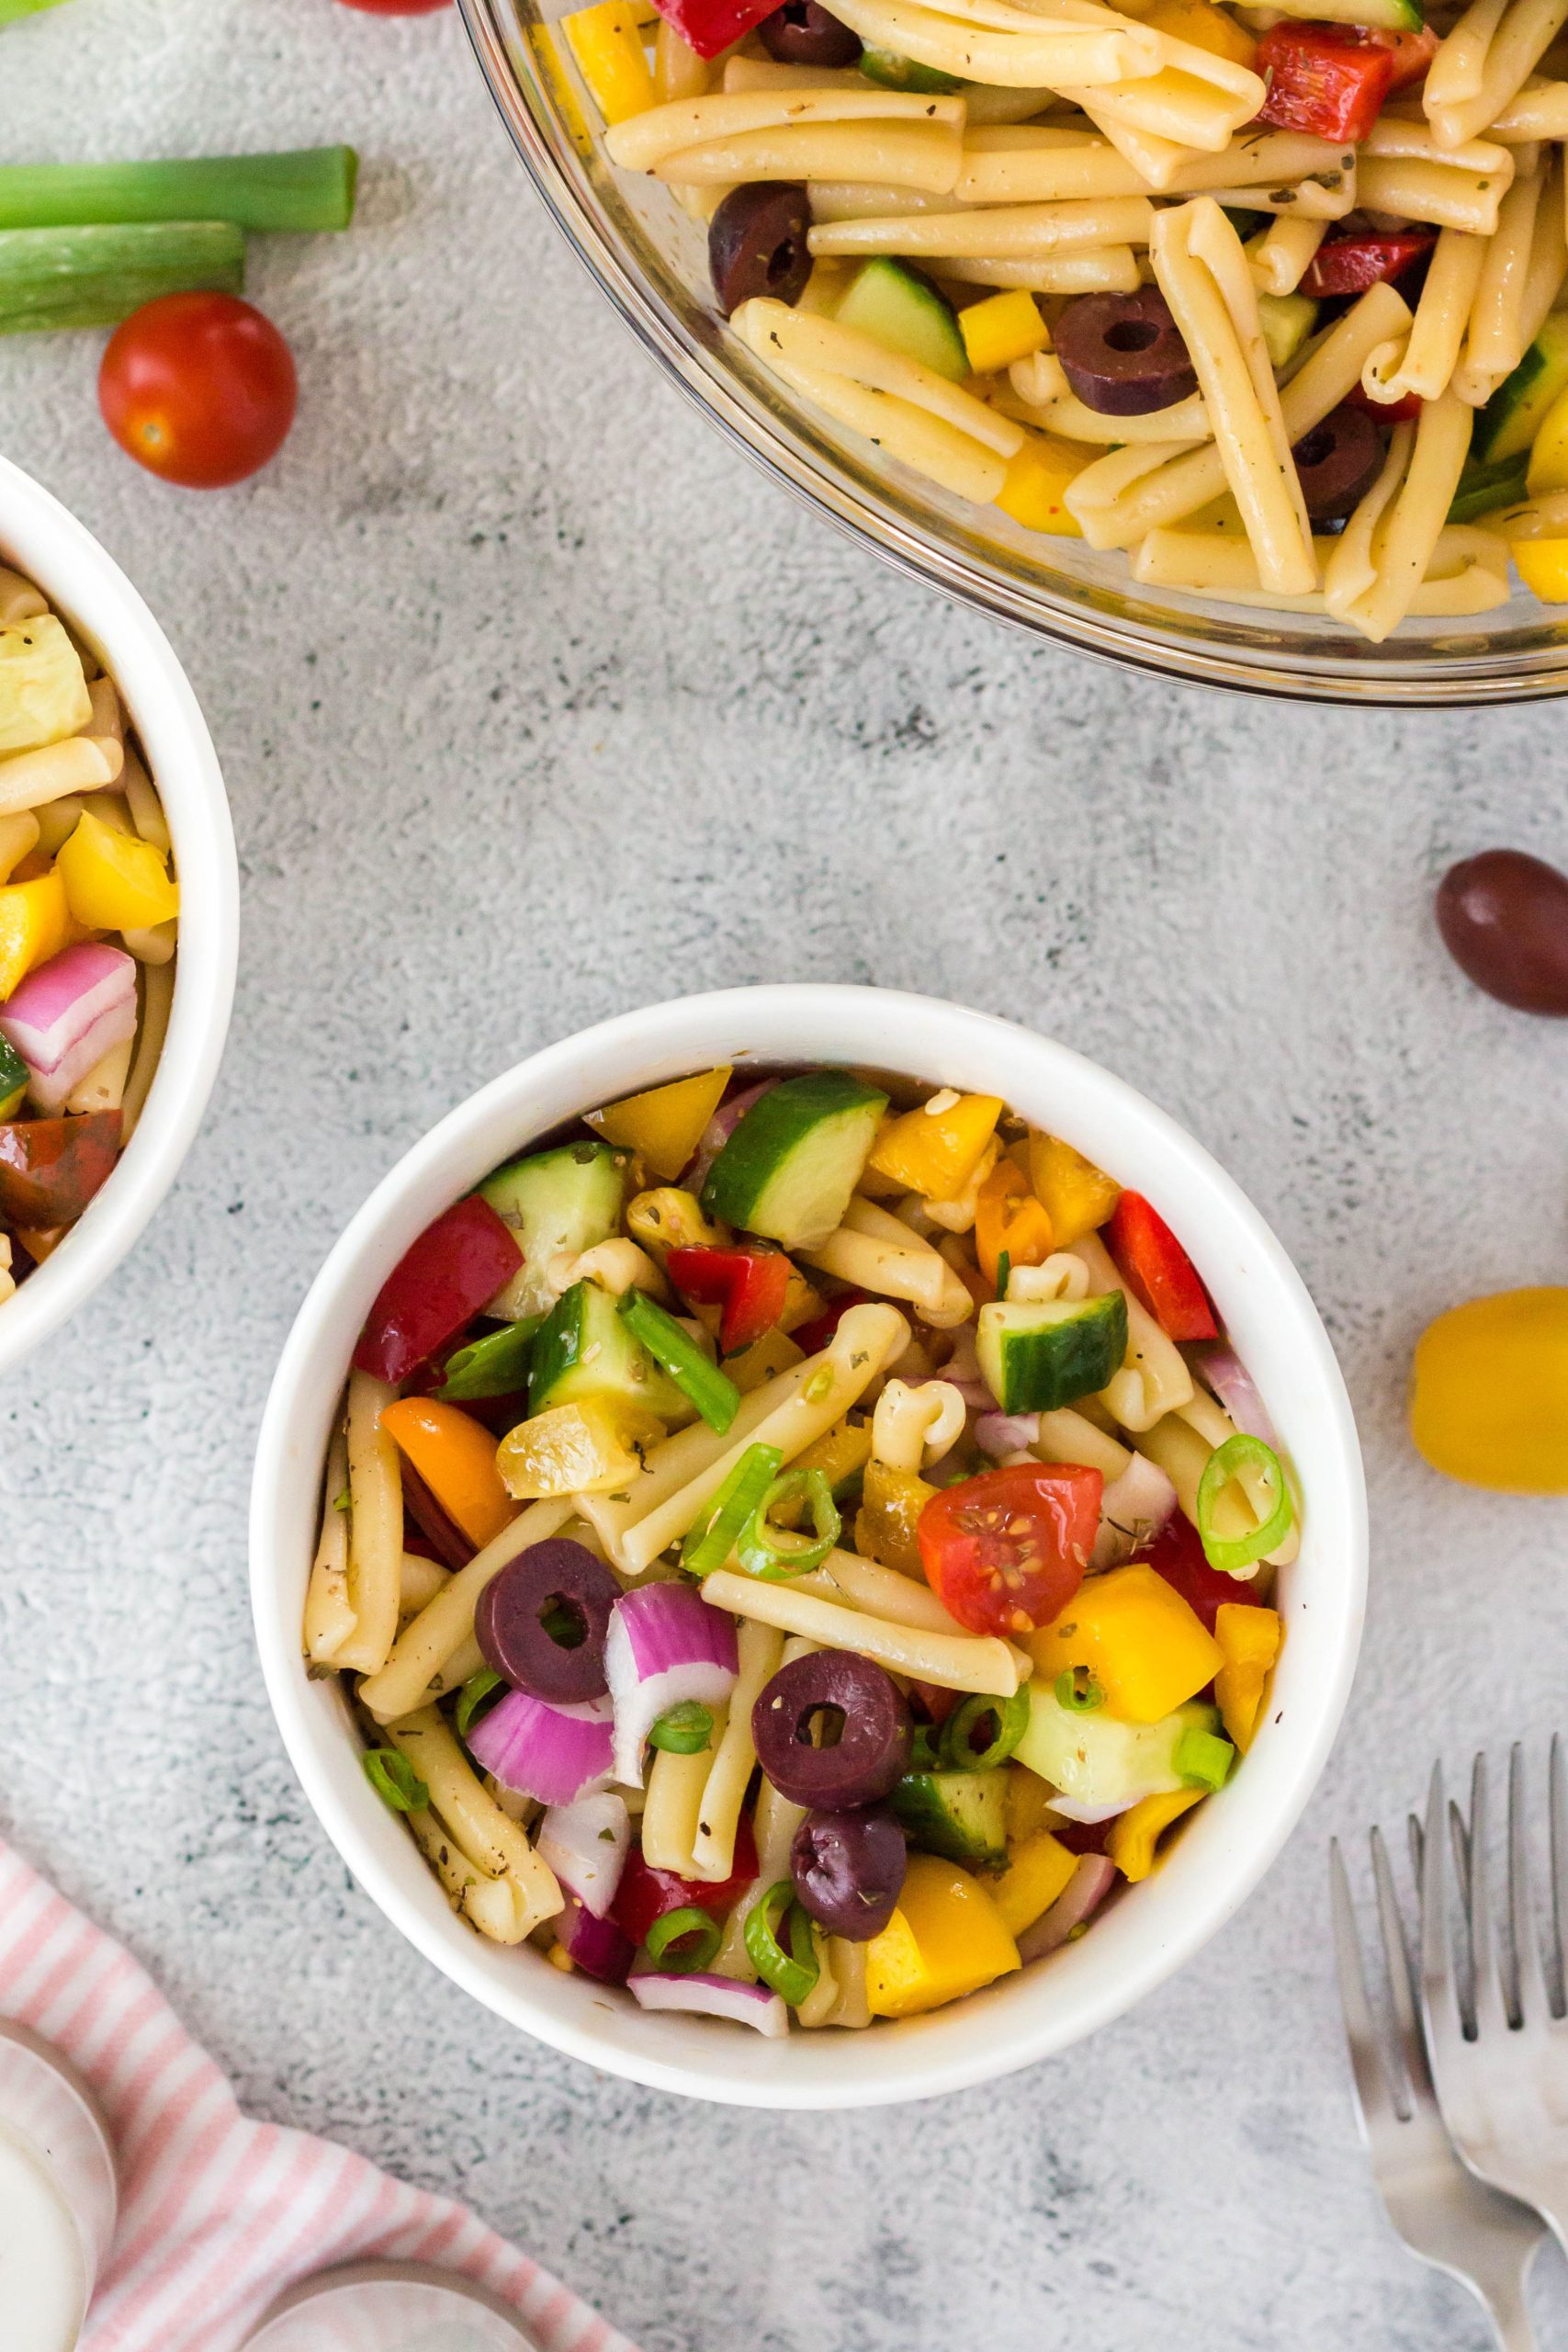 Simple to make and requested at potlucks you're going to love this Vegan Pasta Salad Recipe. Made with common vegan pantry staples this recipe is ready to enjoy in just 30 minutes. This is a great make-ahead meal that stores well in the fridge.